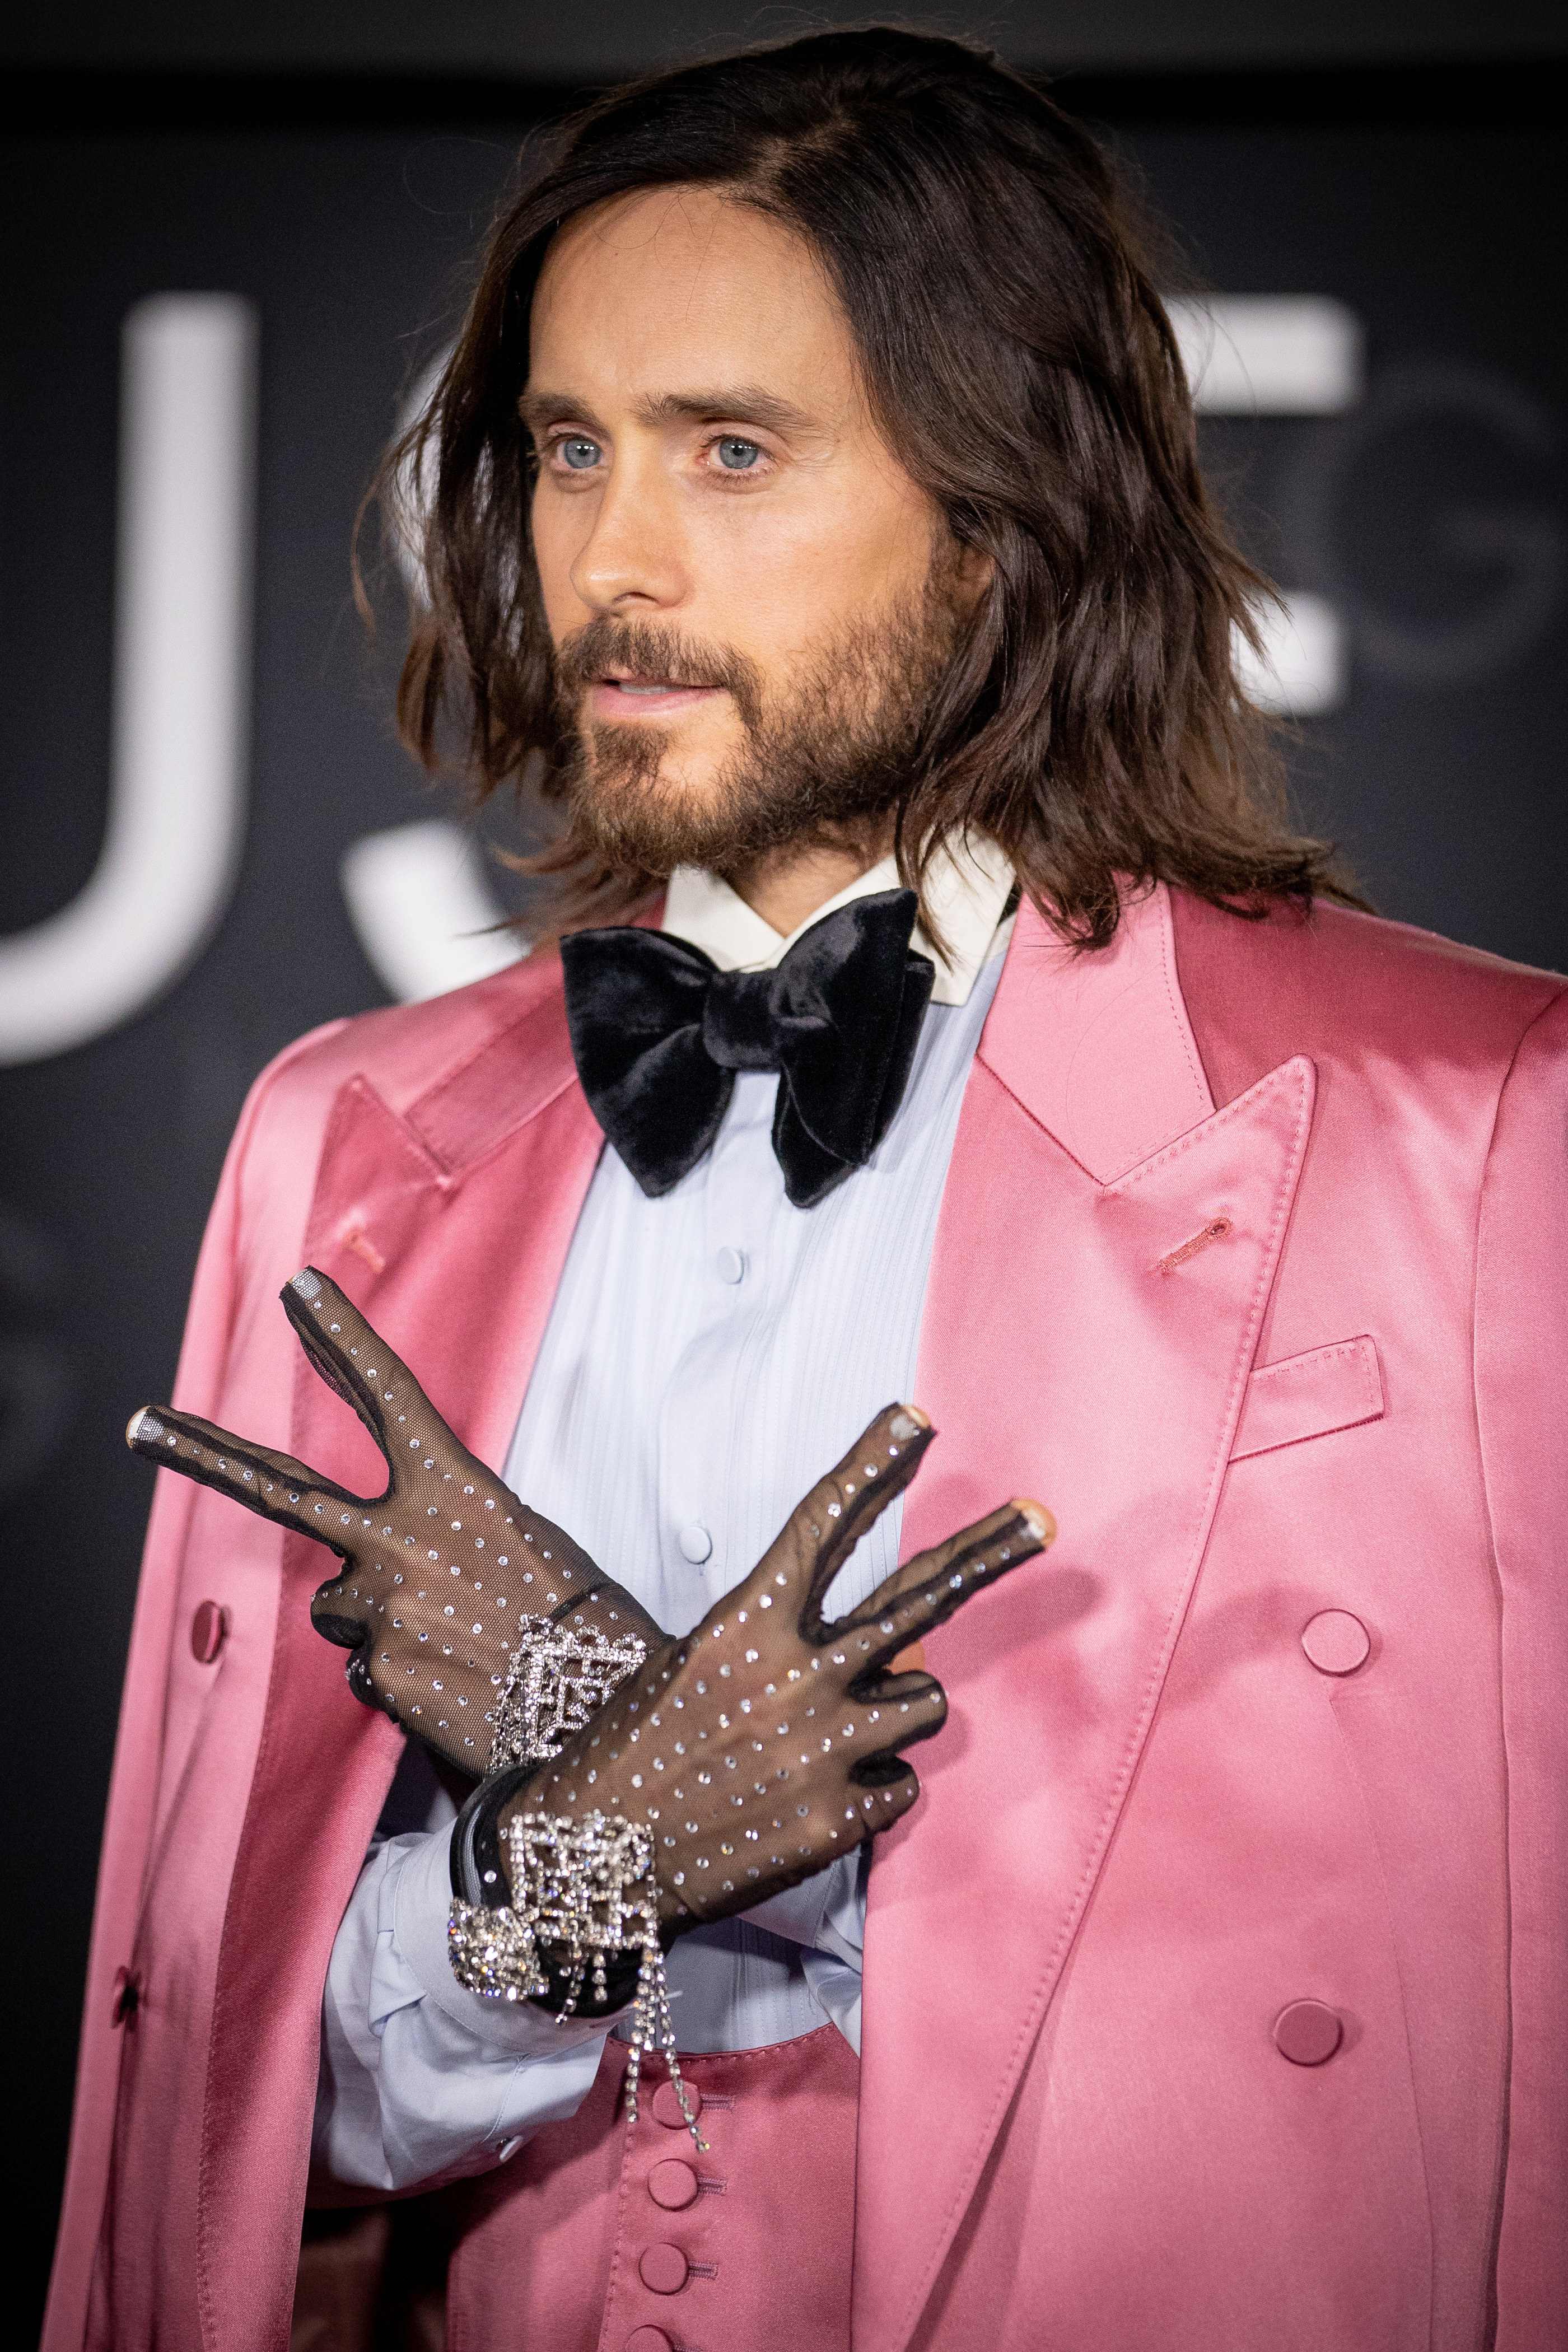 Leto puts up peace signs while wearing see-through gloves that are bedazzled